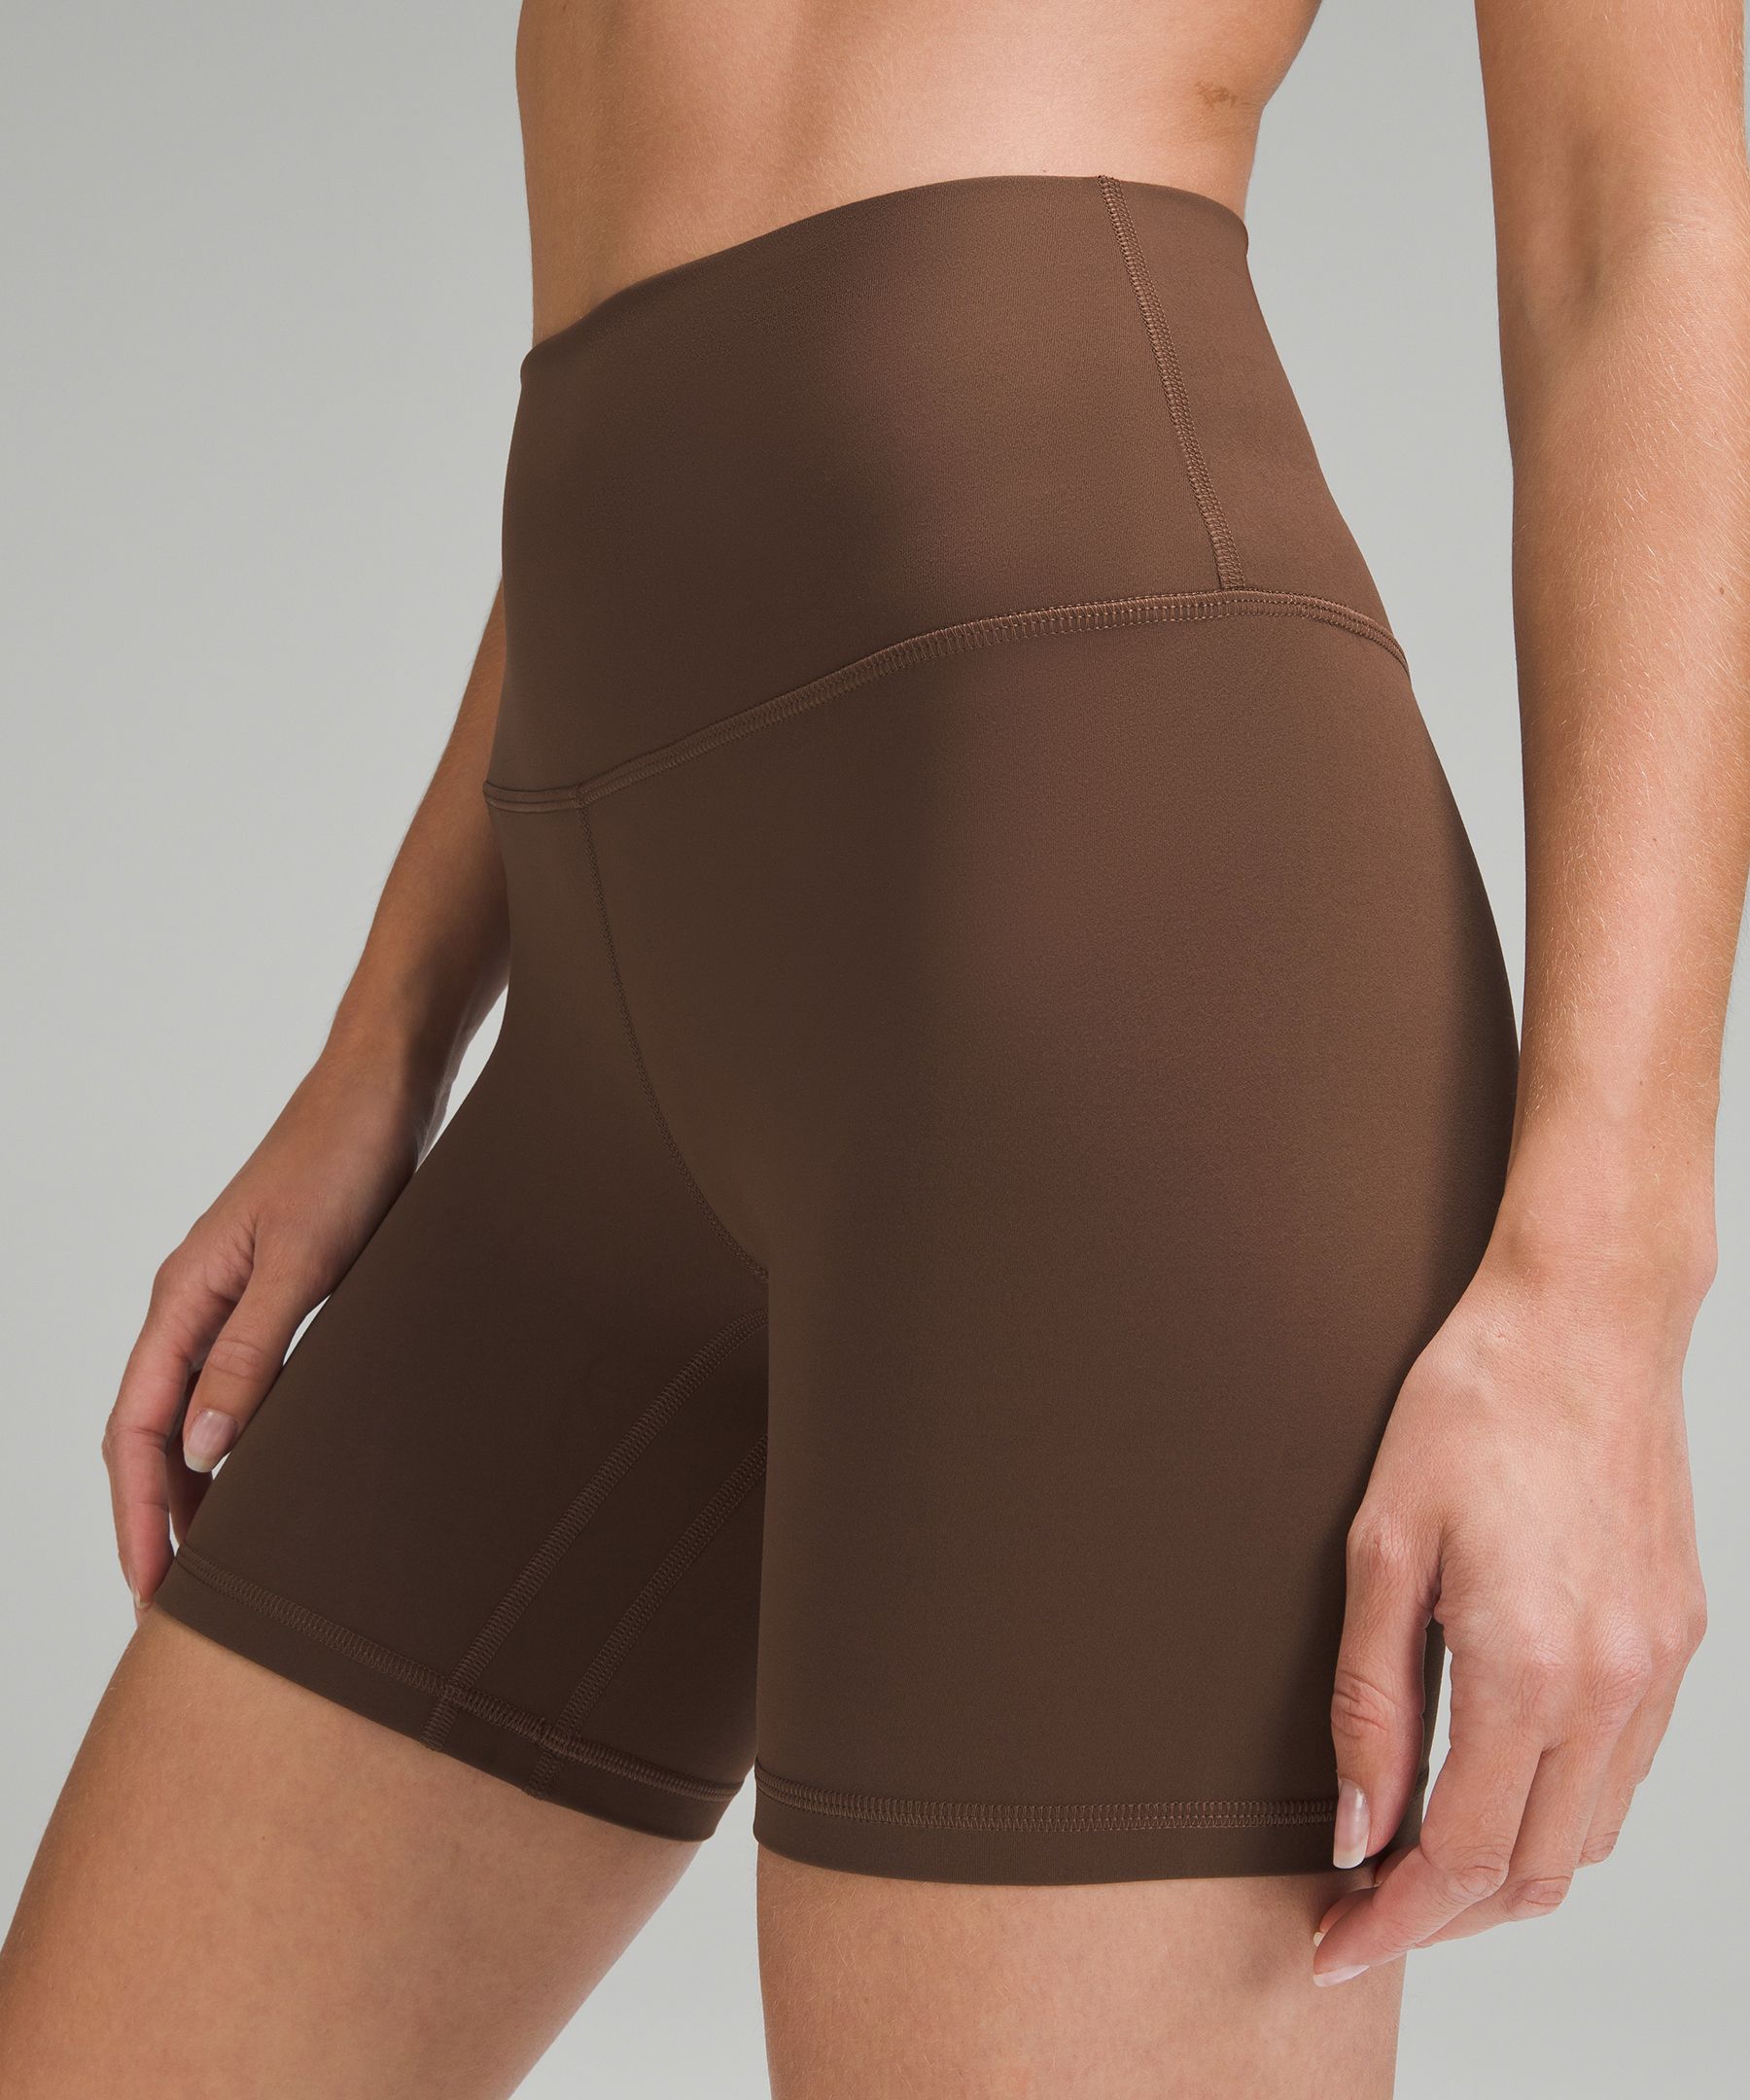 FTBS and Align shorts 6” in Saddle Brown : r/lululemon